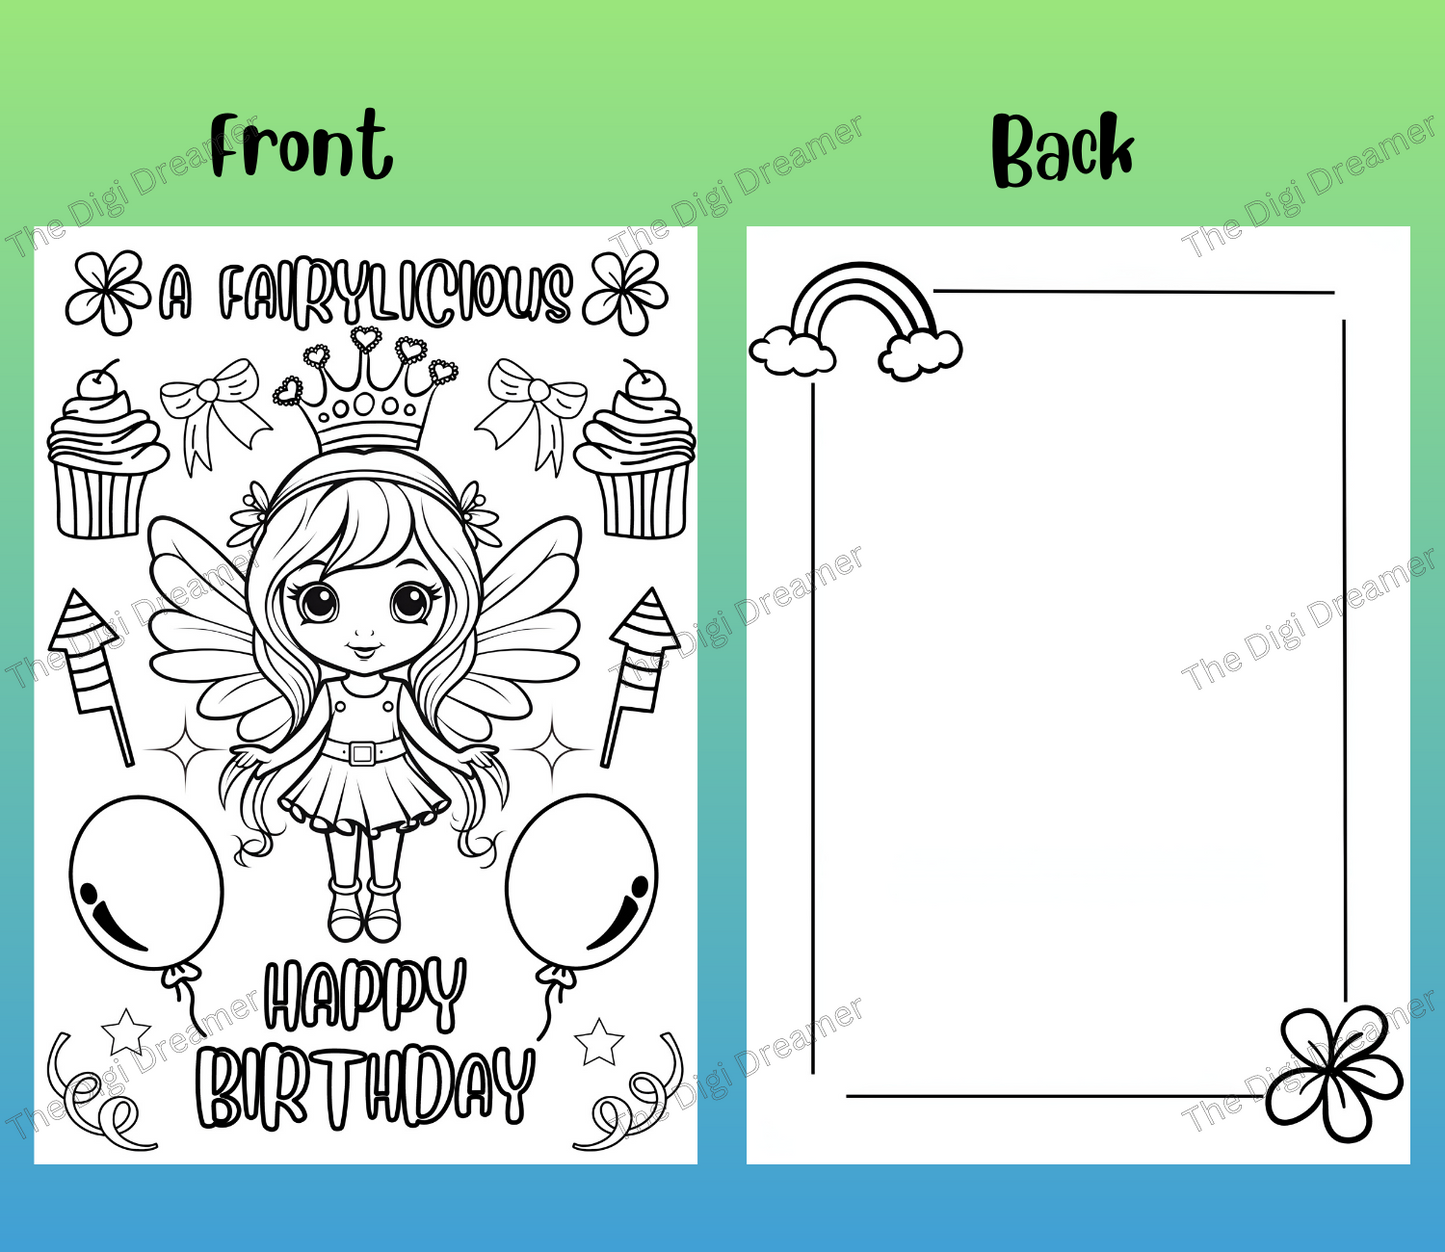 Printable Fairy Coloring Birthday Greeting Card For Kids, DIY Birthday Gift